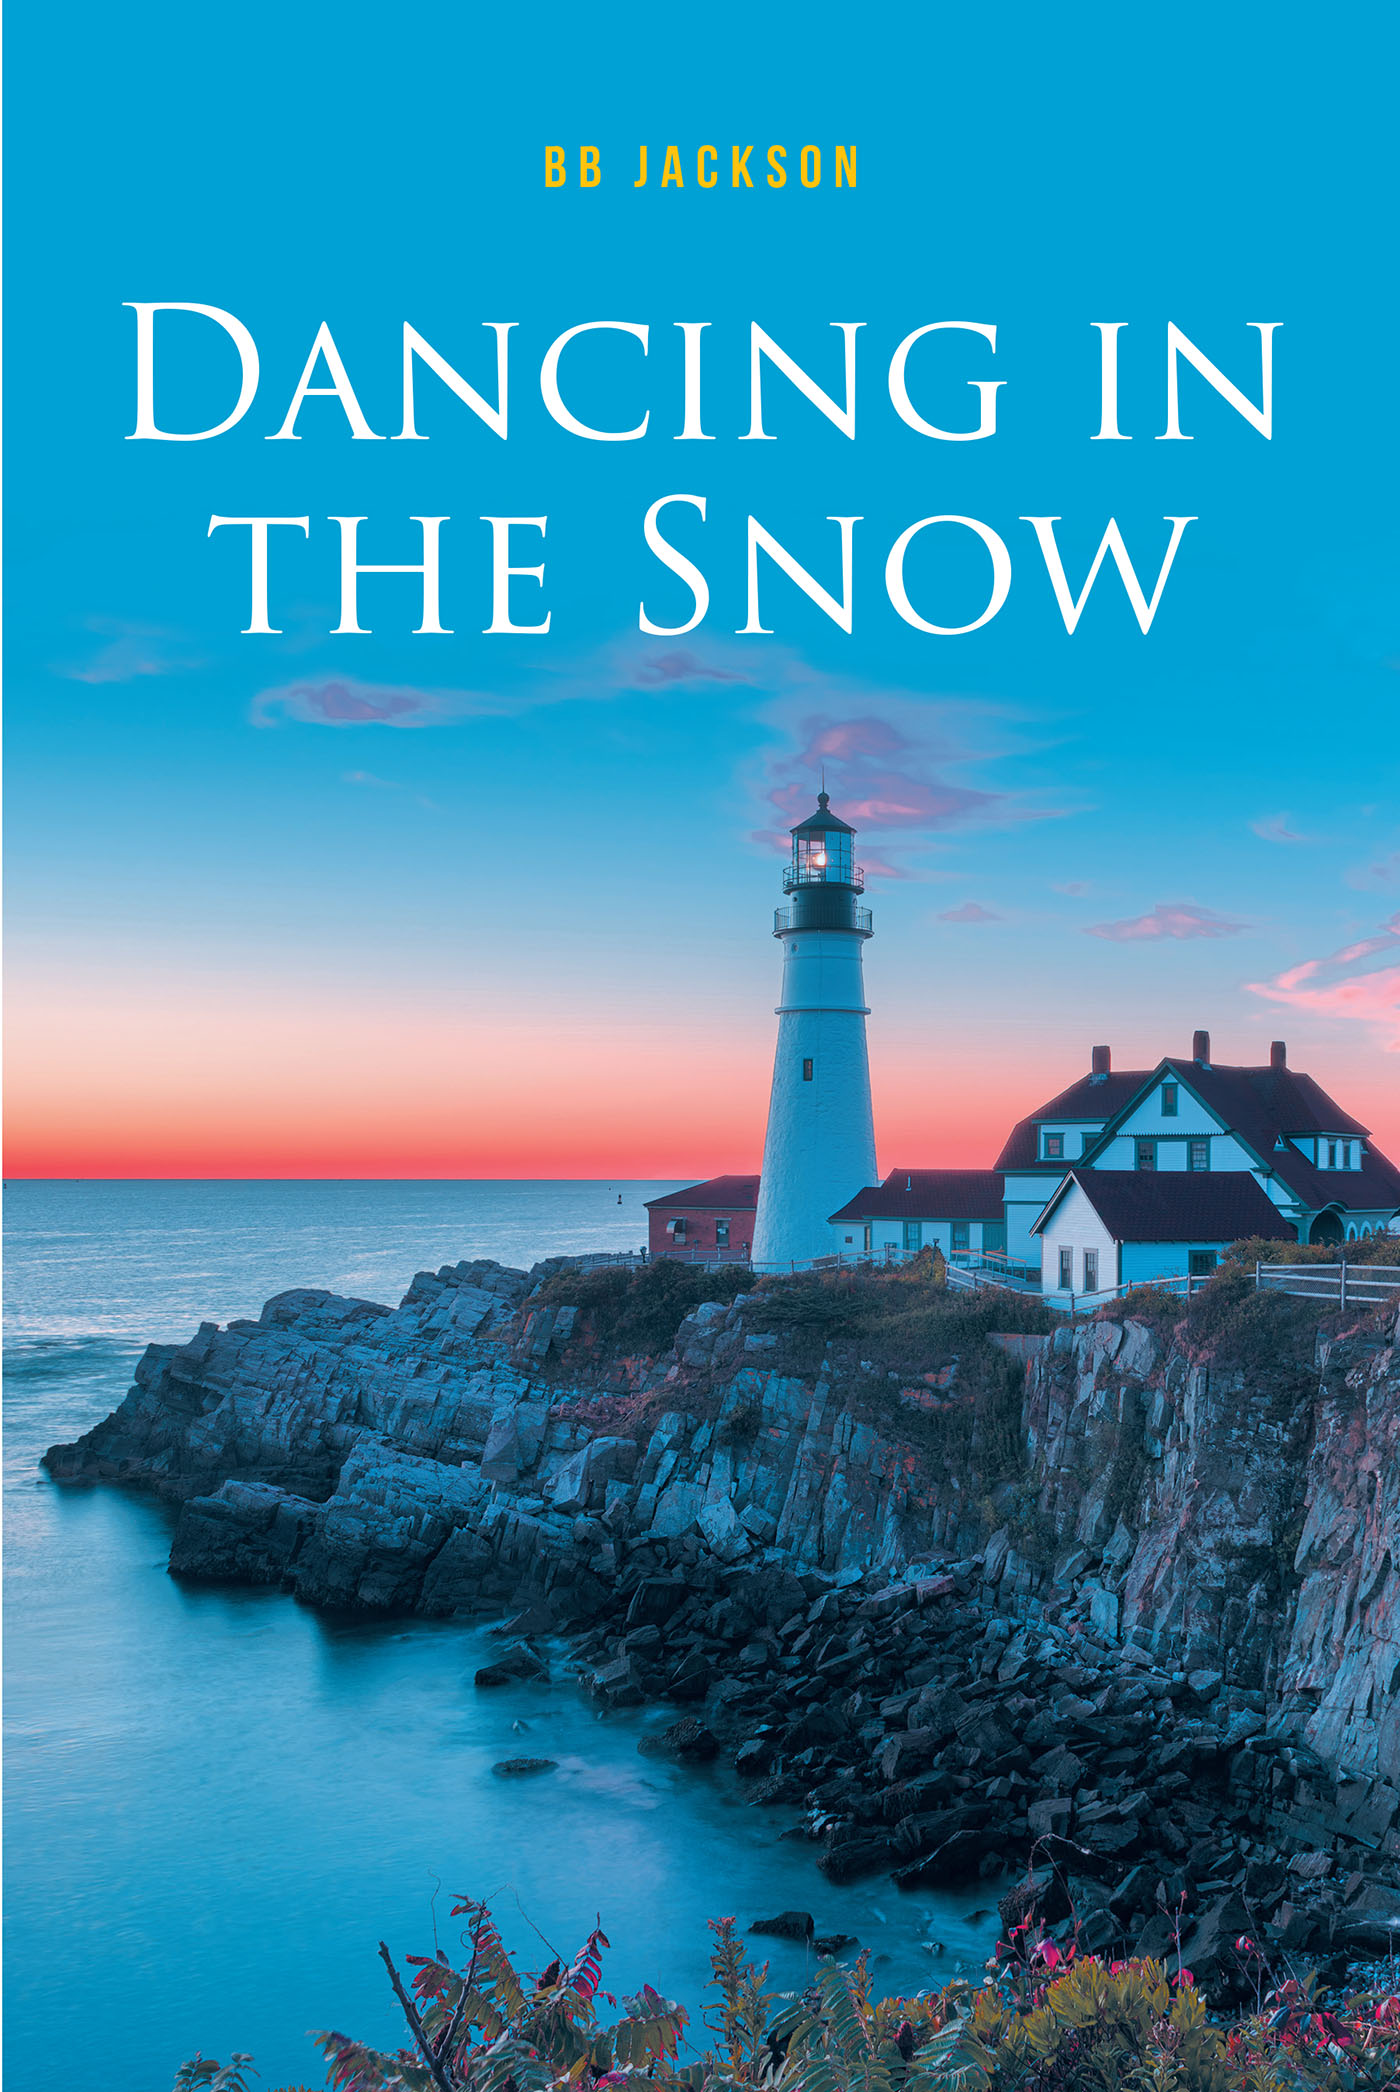 BB Jackson’s New Book, “Dancing In The Snow,” is a Heartfelt Tale of Recovering from Old Wounds, Dealing with Difficult Family Secrets, and Learning to Forgive